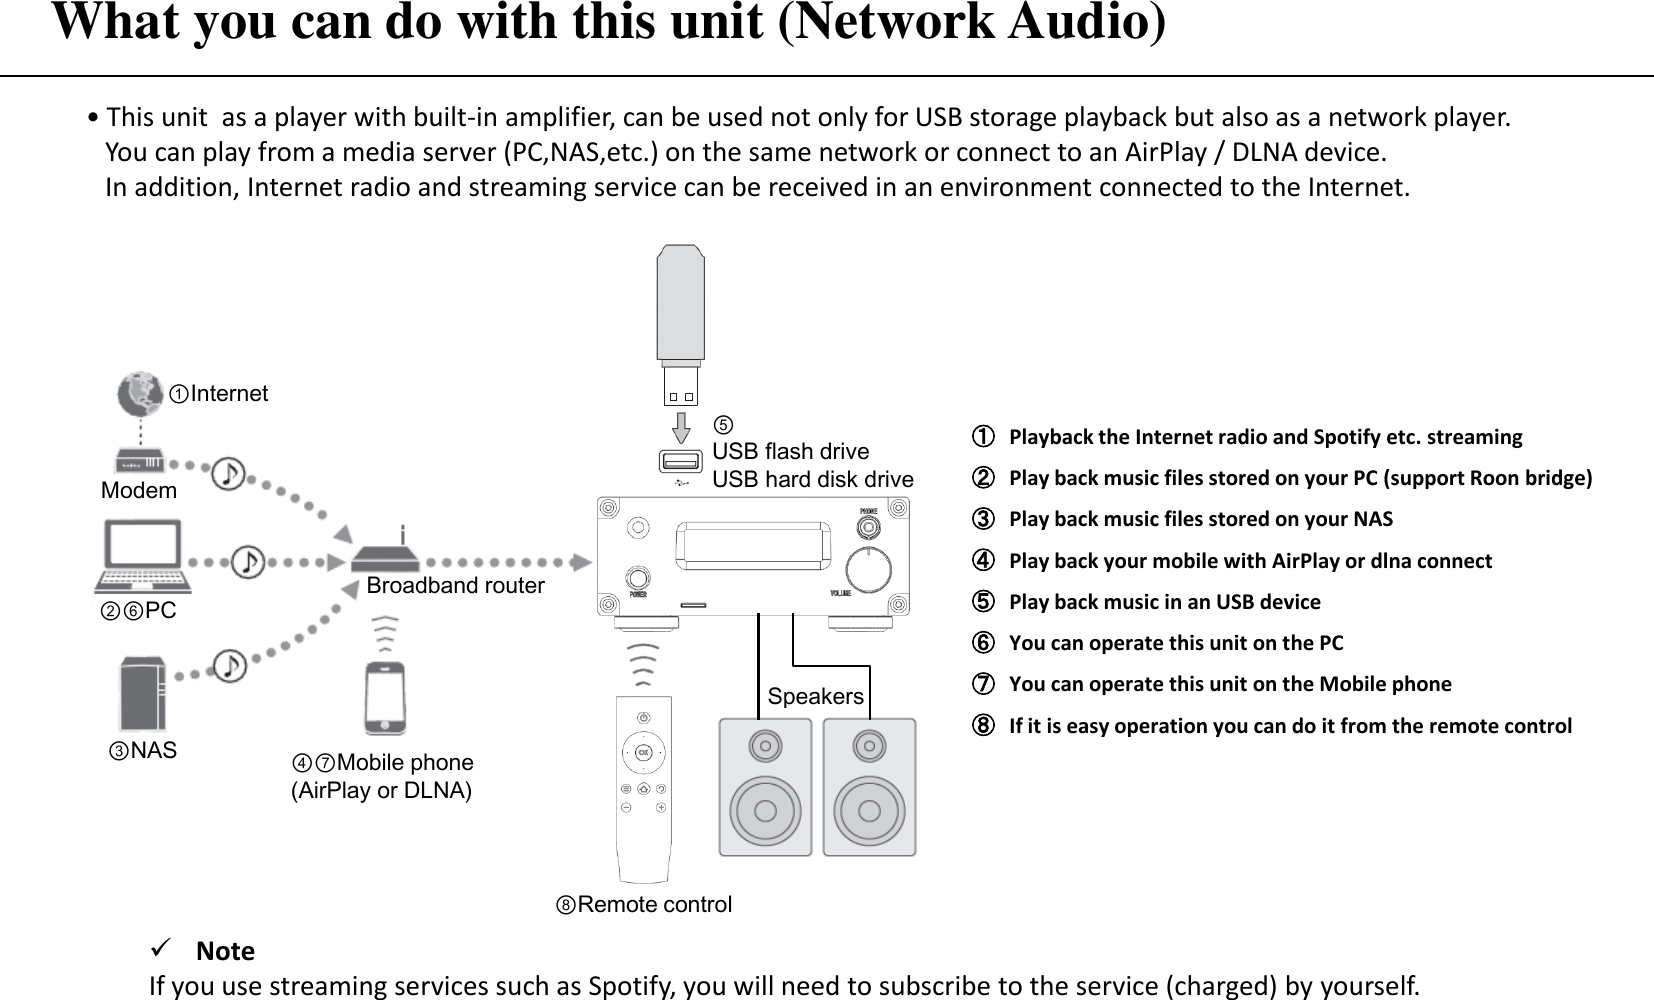 What you can do with this unit (Network Audio) • This unit  as a player with built-in amplifier, can be used not only for USB storage playback but also as a network player.    You can play from a media server (PC,NAS,etc.) on the same network or connect to an AirPlay / DLNA device.    In addition, Internet radio and streaming service can be received in an environment connected to the Internet. ①Playback the Internet radio and Spotify etc. streaming ②Play back music files stored on your PC (support Roon bridge) ③Play back music files stored on your NAS ④Play back your mobile with AirPlay or dlna connect ⑤Play back music in an USB device ⑥You can operate this unit on the PC ⑦You can operate this unit on the Mobile phone ⑧If it is easy operation you can do it from the remote control  ①Internet ②⑥PC ③NAS Broadband router ④⑦Mobile phone (AirPlay or DLNA) Modem ⑧Remote control ⑤ USB flash drive USB hard disk drive Speakers Note If you use streaming services such as Spotify, you will need to subscribe to the service (charged) by yourself. 